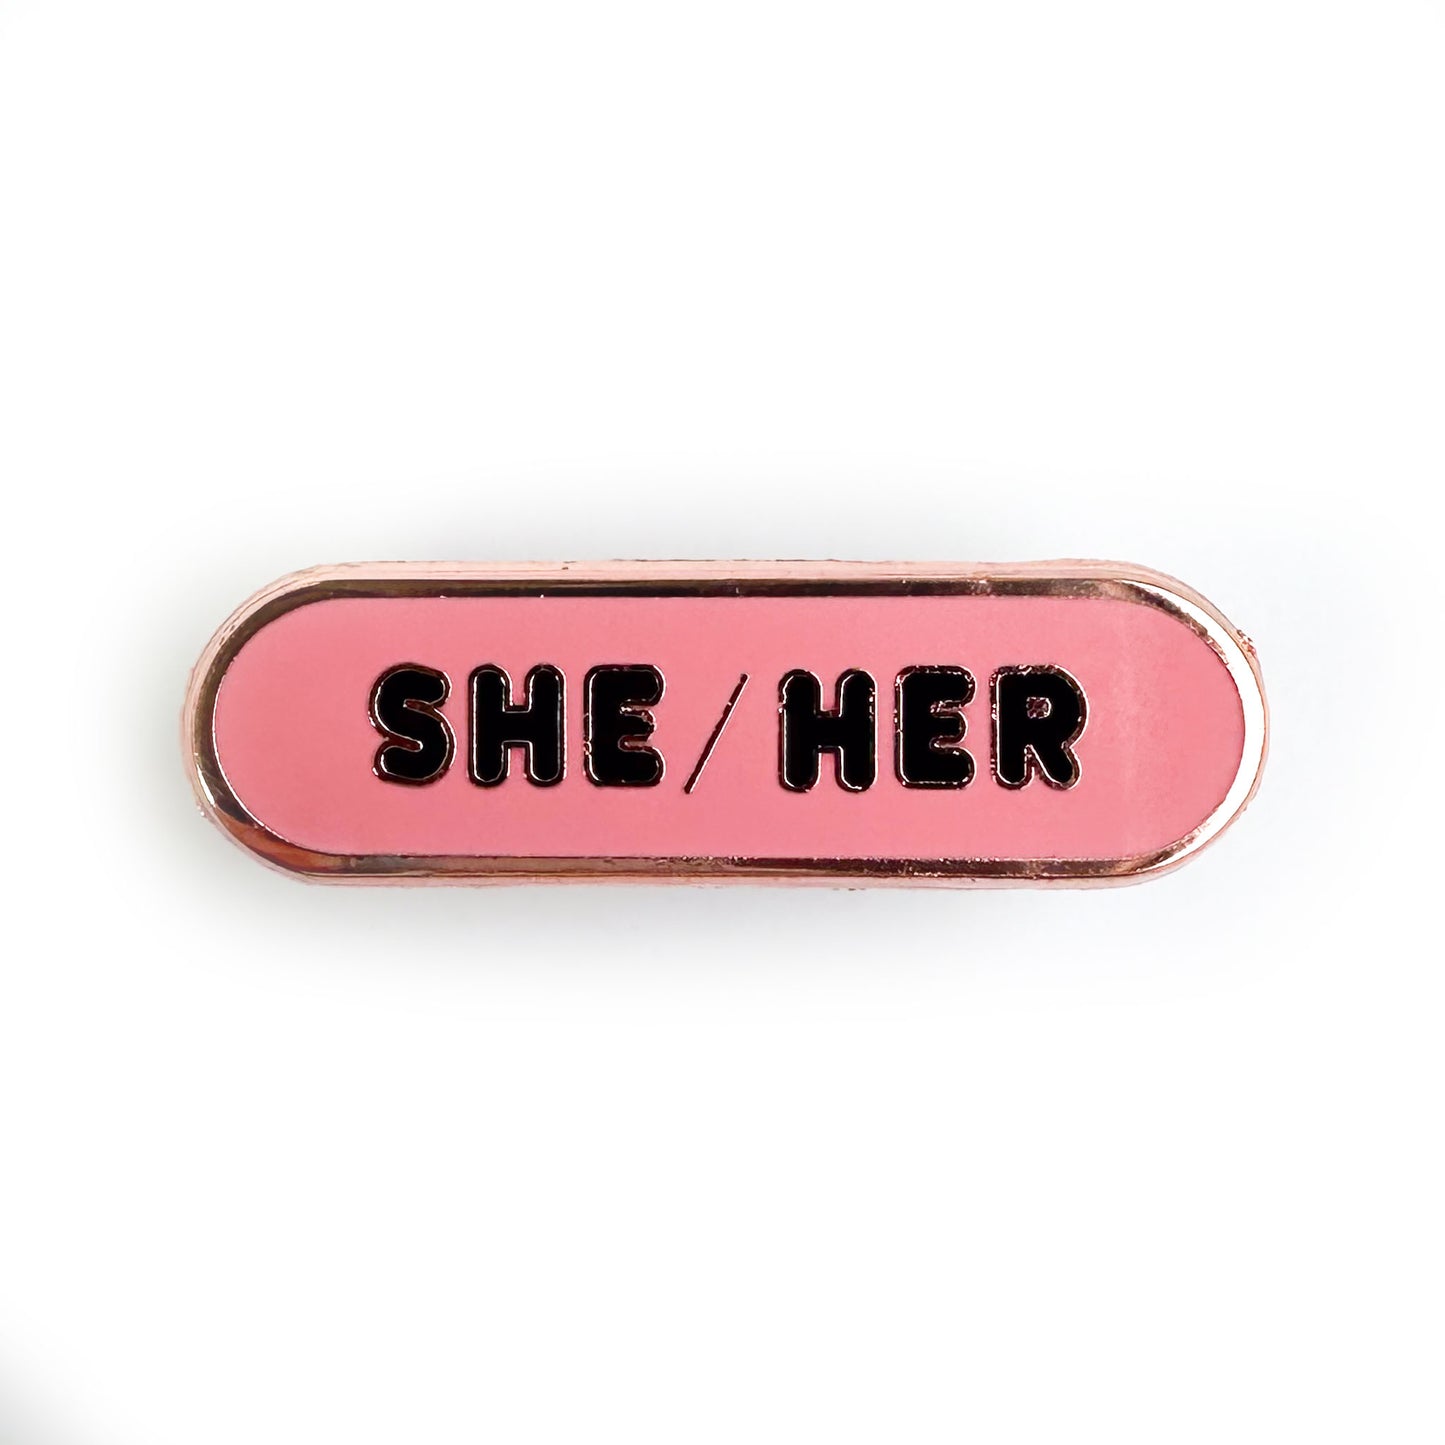 A pink enamel pin with the words "She/Her" written on it in black letters. 